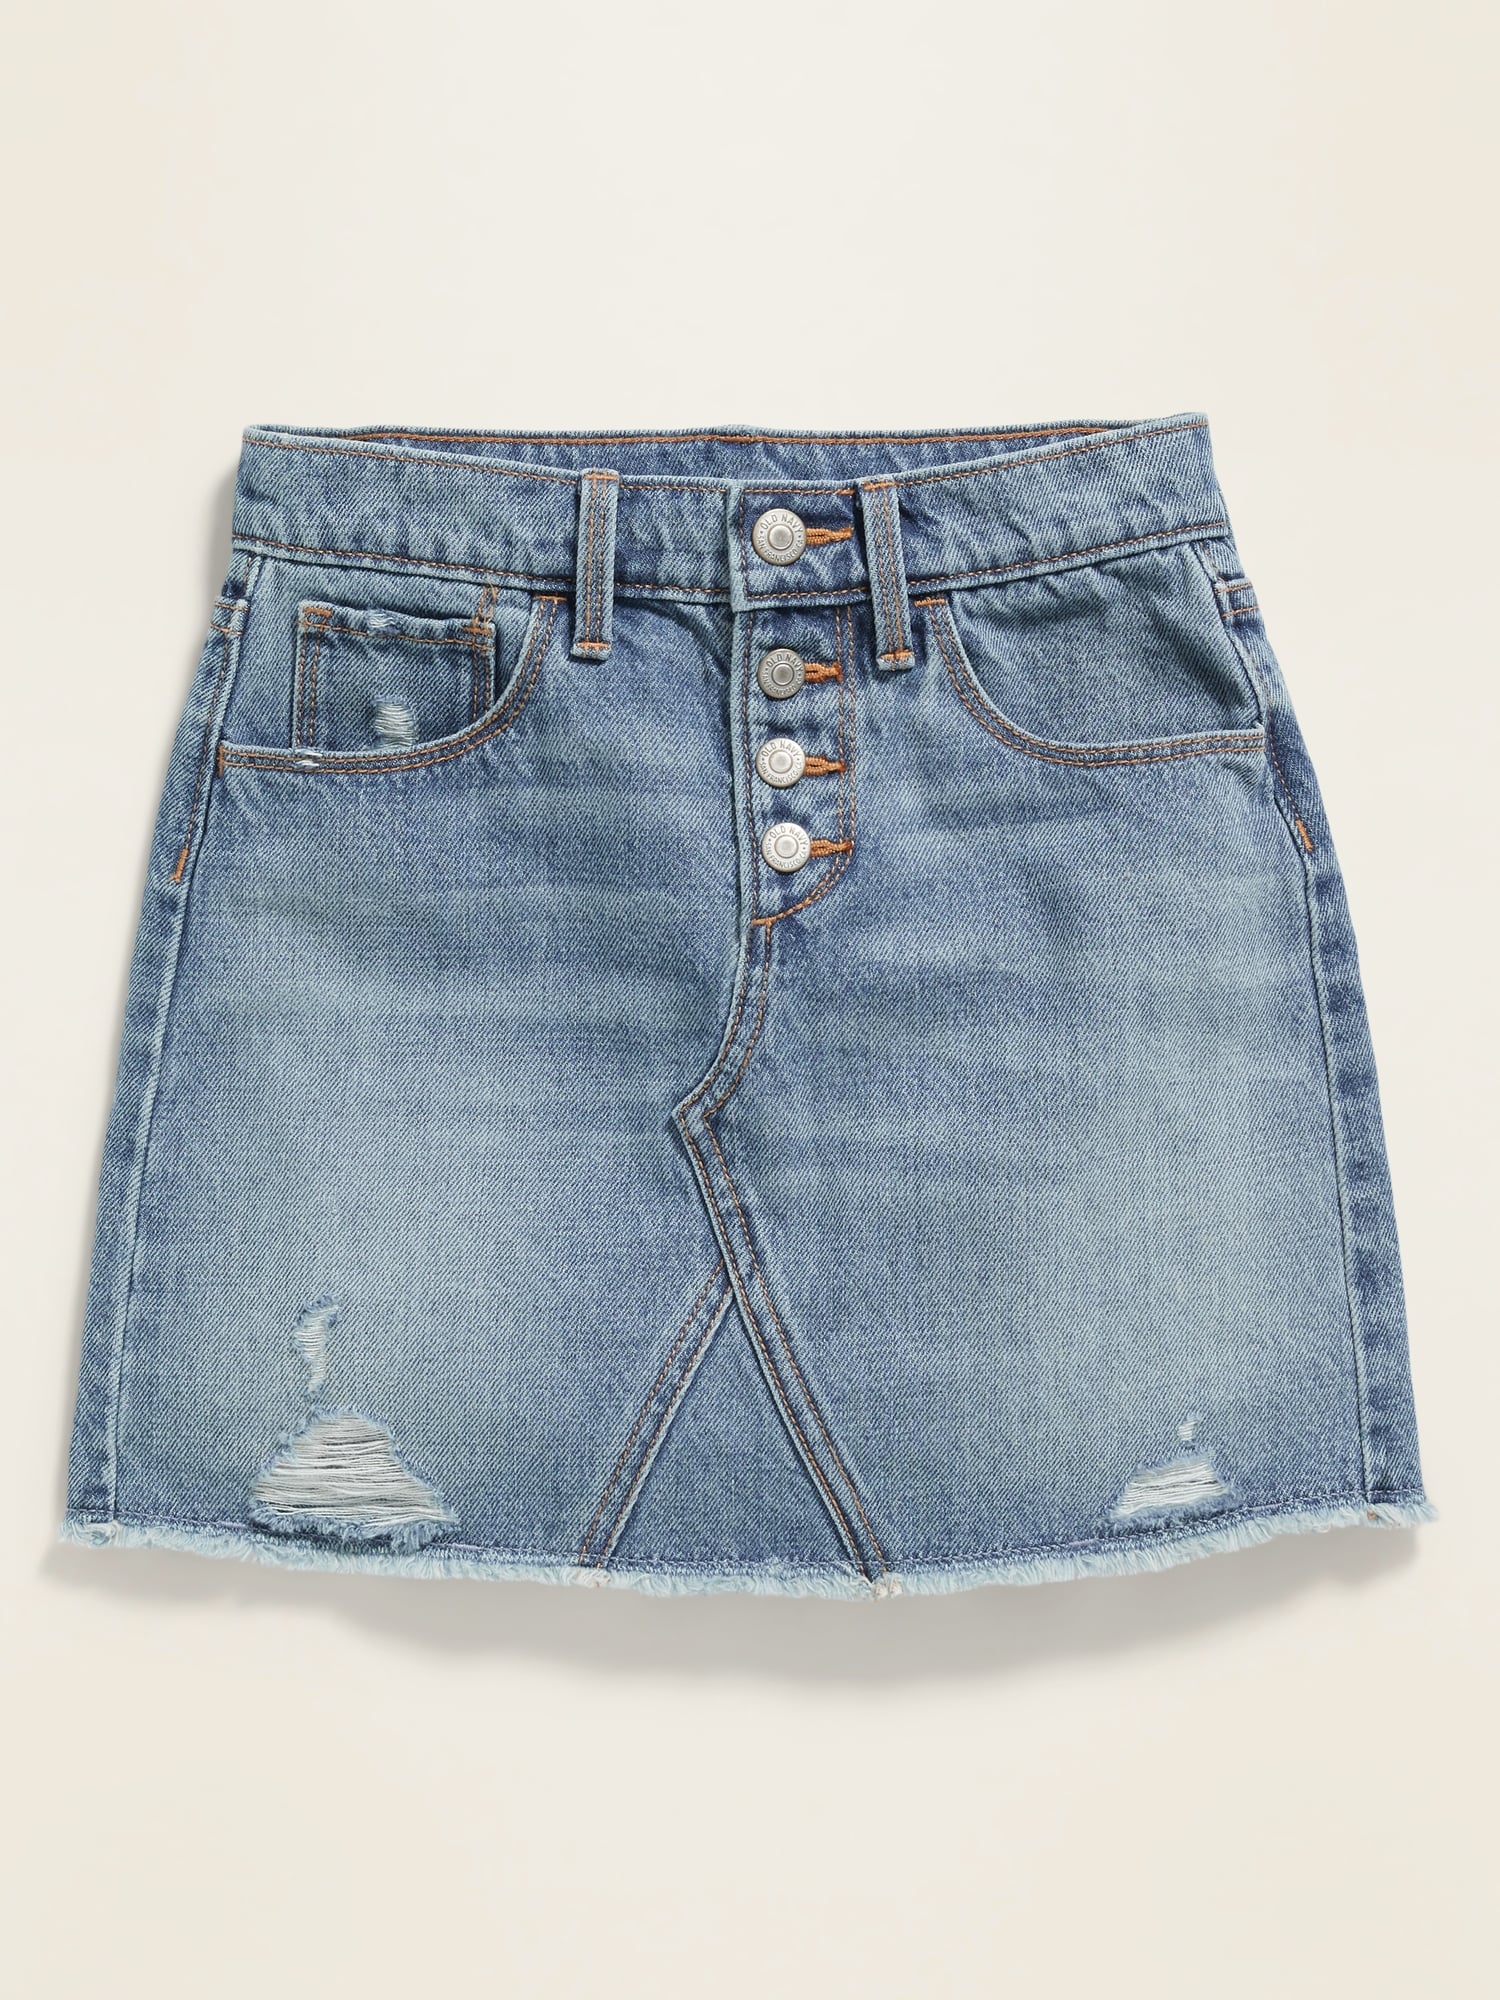 High Waisted Button Fly Frayed Hem Jean Skirt For Girls Old Navy